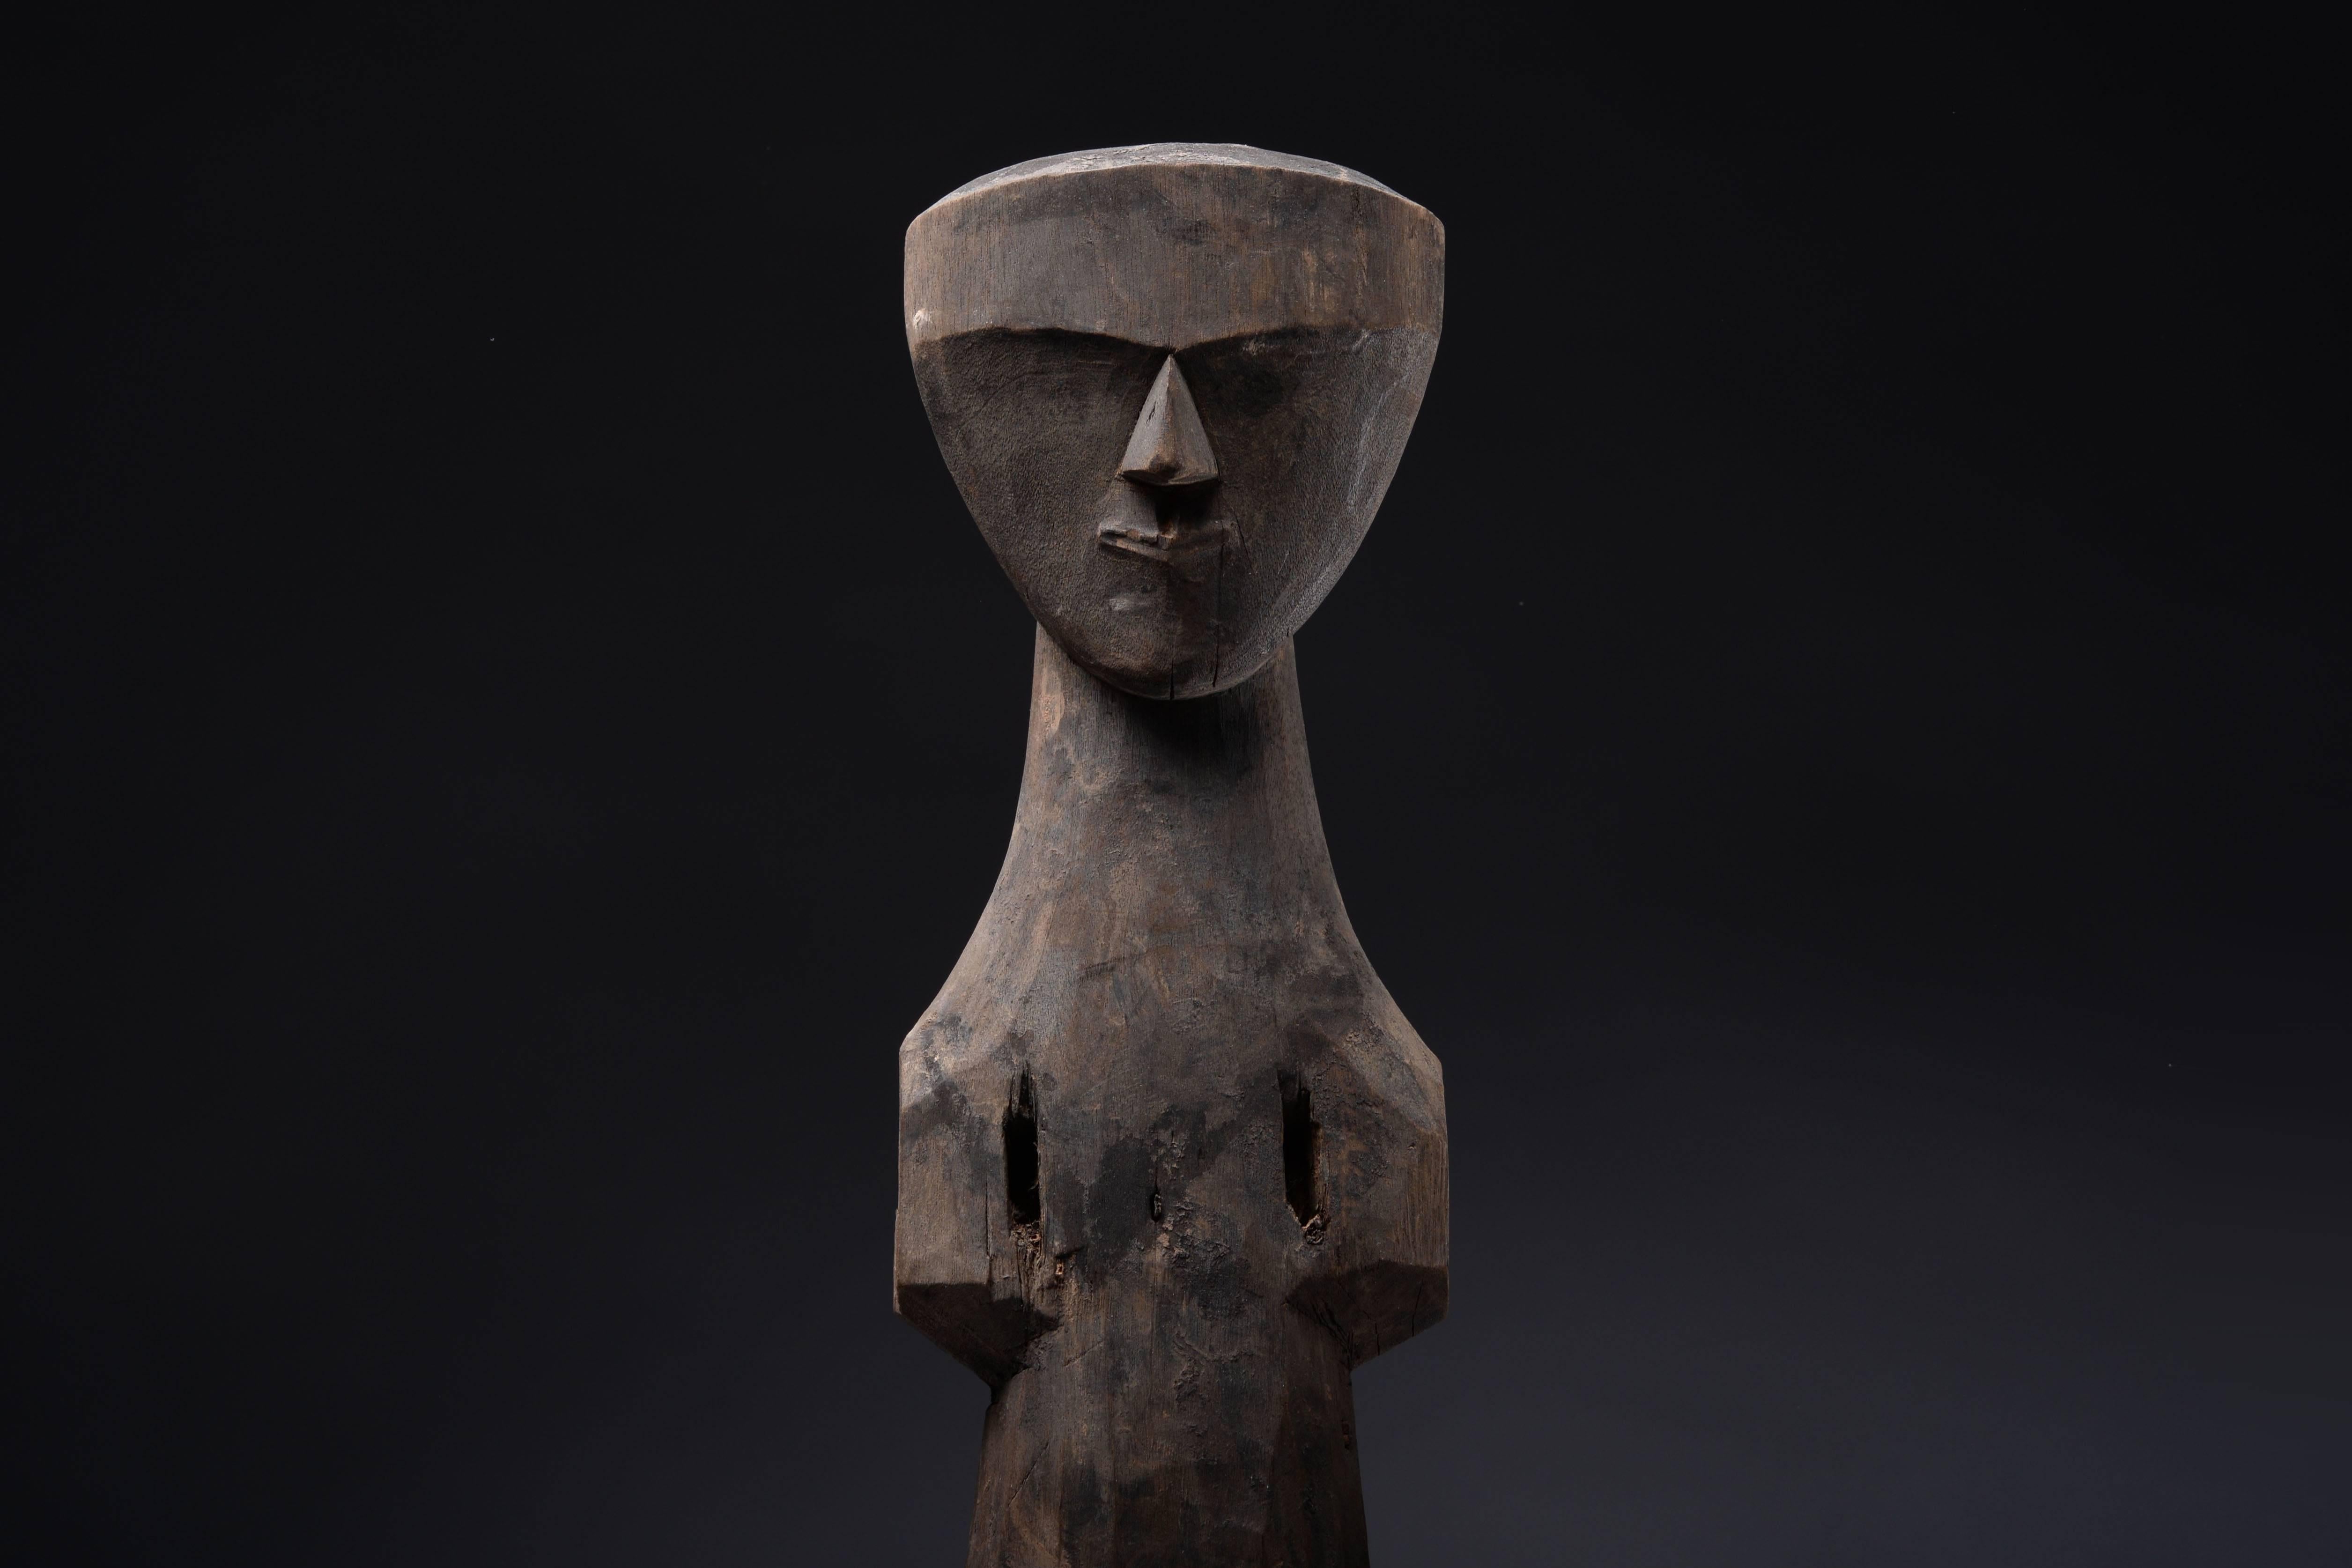 An ancient Chinese wooden figure, dating to the Chu Kingdom, 4th - 3rd century BC.

A striking piece of abstract ancient sculpture. Skilfully carved from a beautiful piece of wood; the towering body leading to a slender neck and perfectly